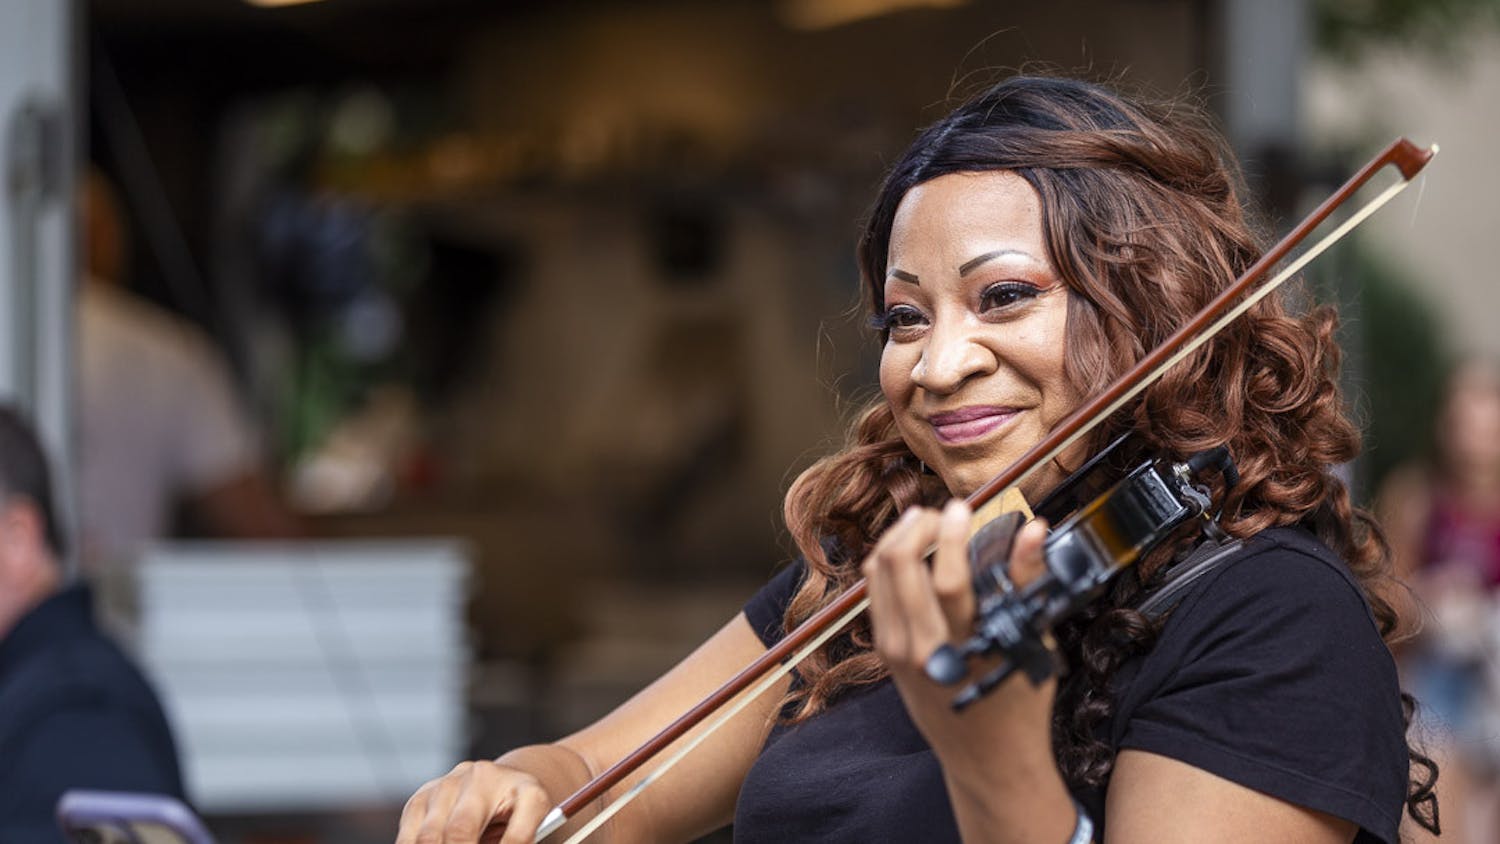 Martina Williams plays the violin at Soda City Market on Sept. 23, 2023. Williams has played music professionally for two-and-a-half years and credits busking for helping her turn her passion for music into an occupation.